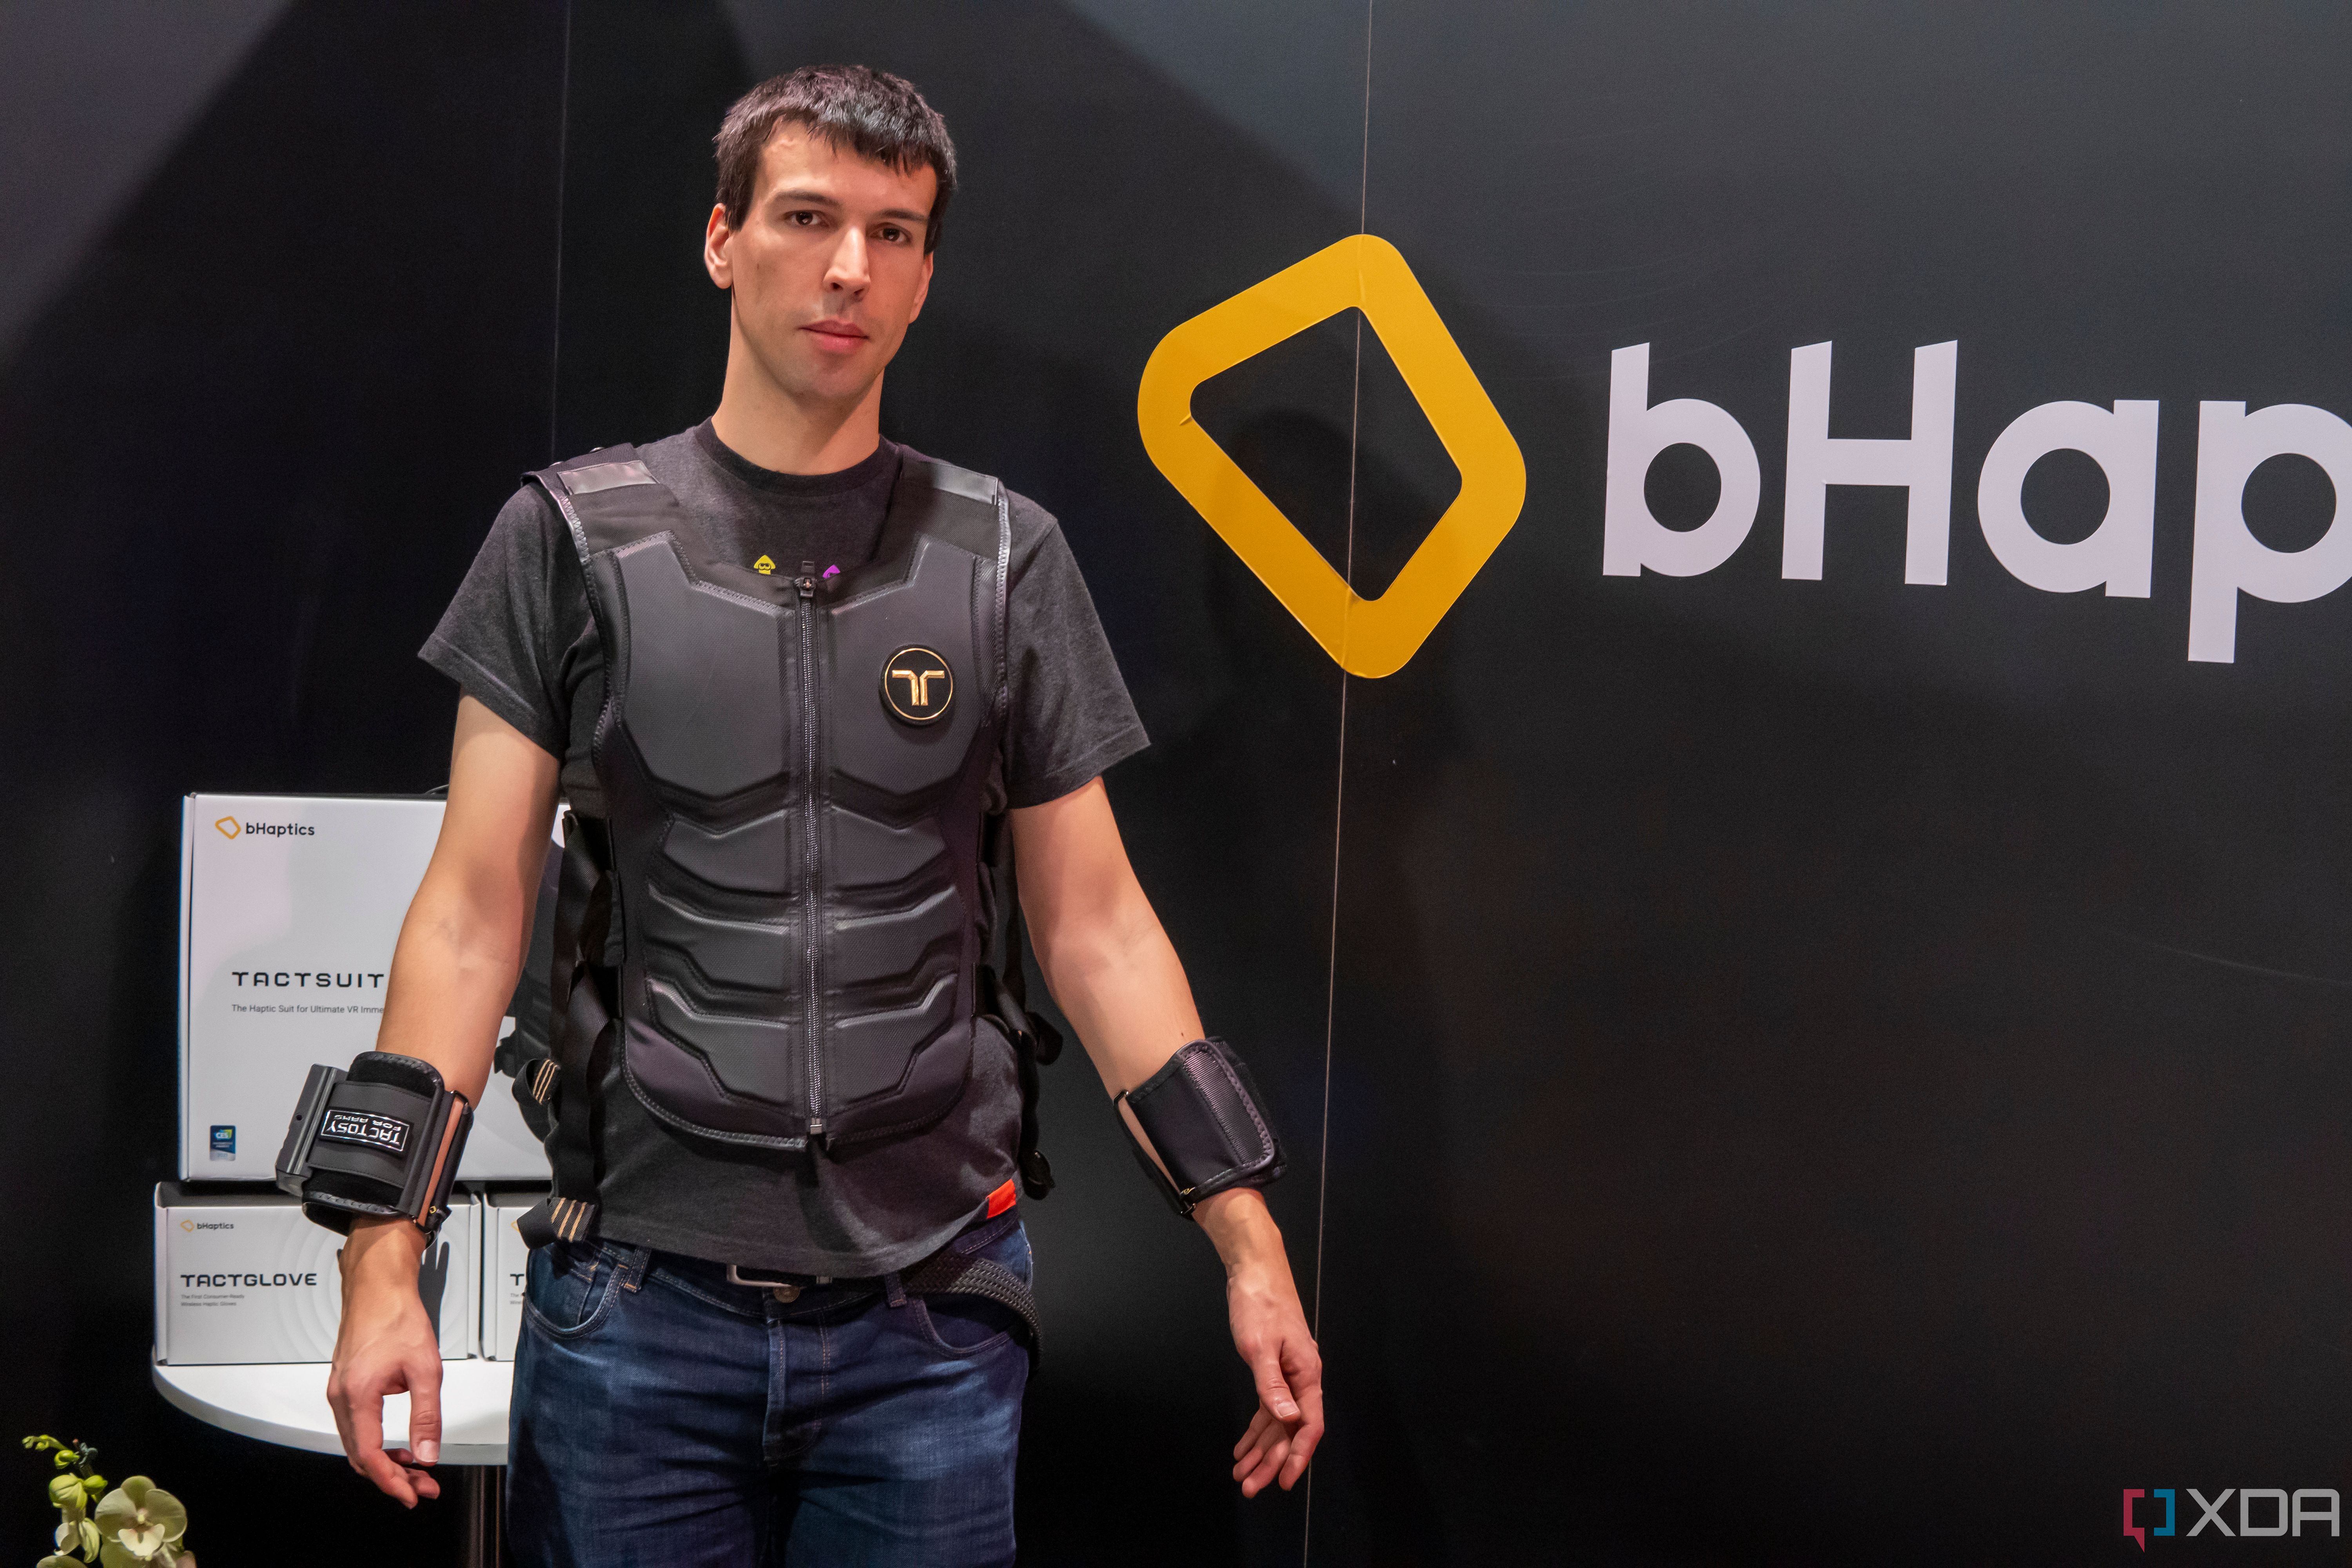 Man wearing a haptic feedback suit and arm bands